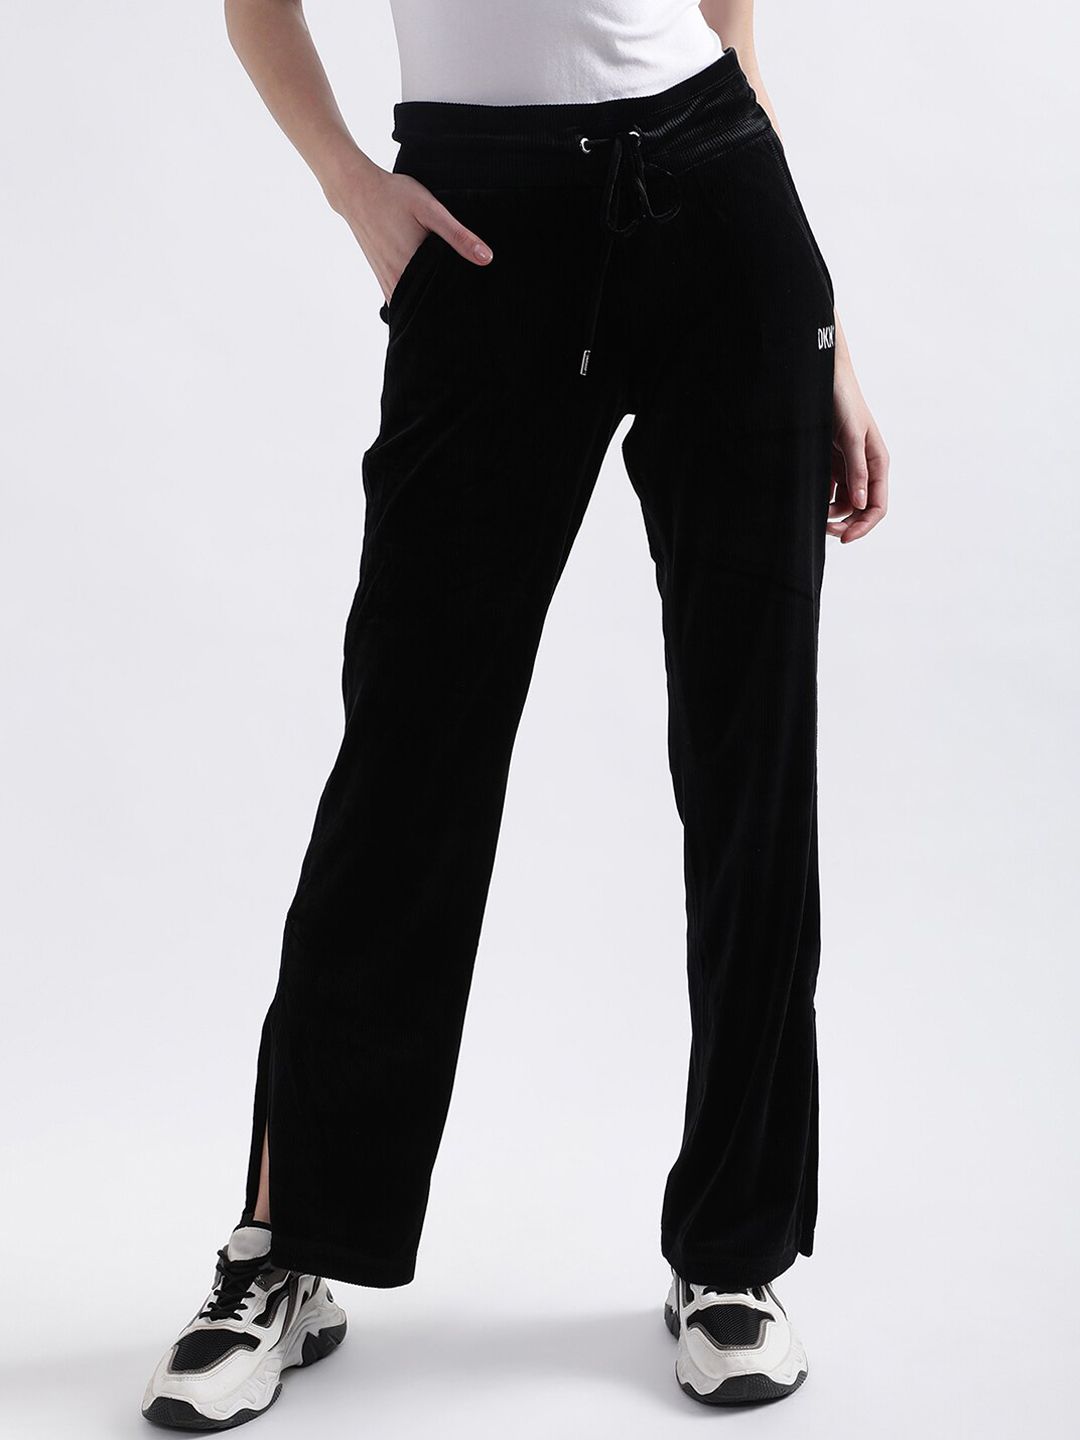 Dkny Women's Soft Ponte-knit High Rise Pull-on Pants In Black | ModeSens